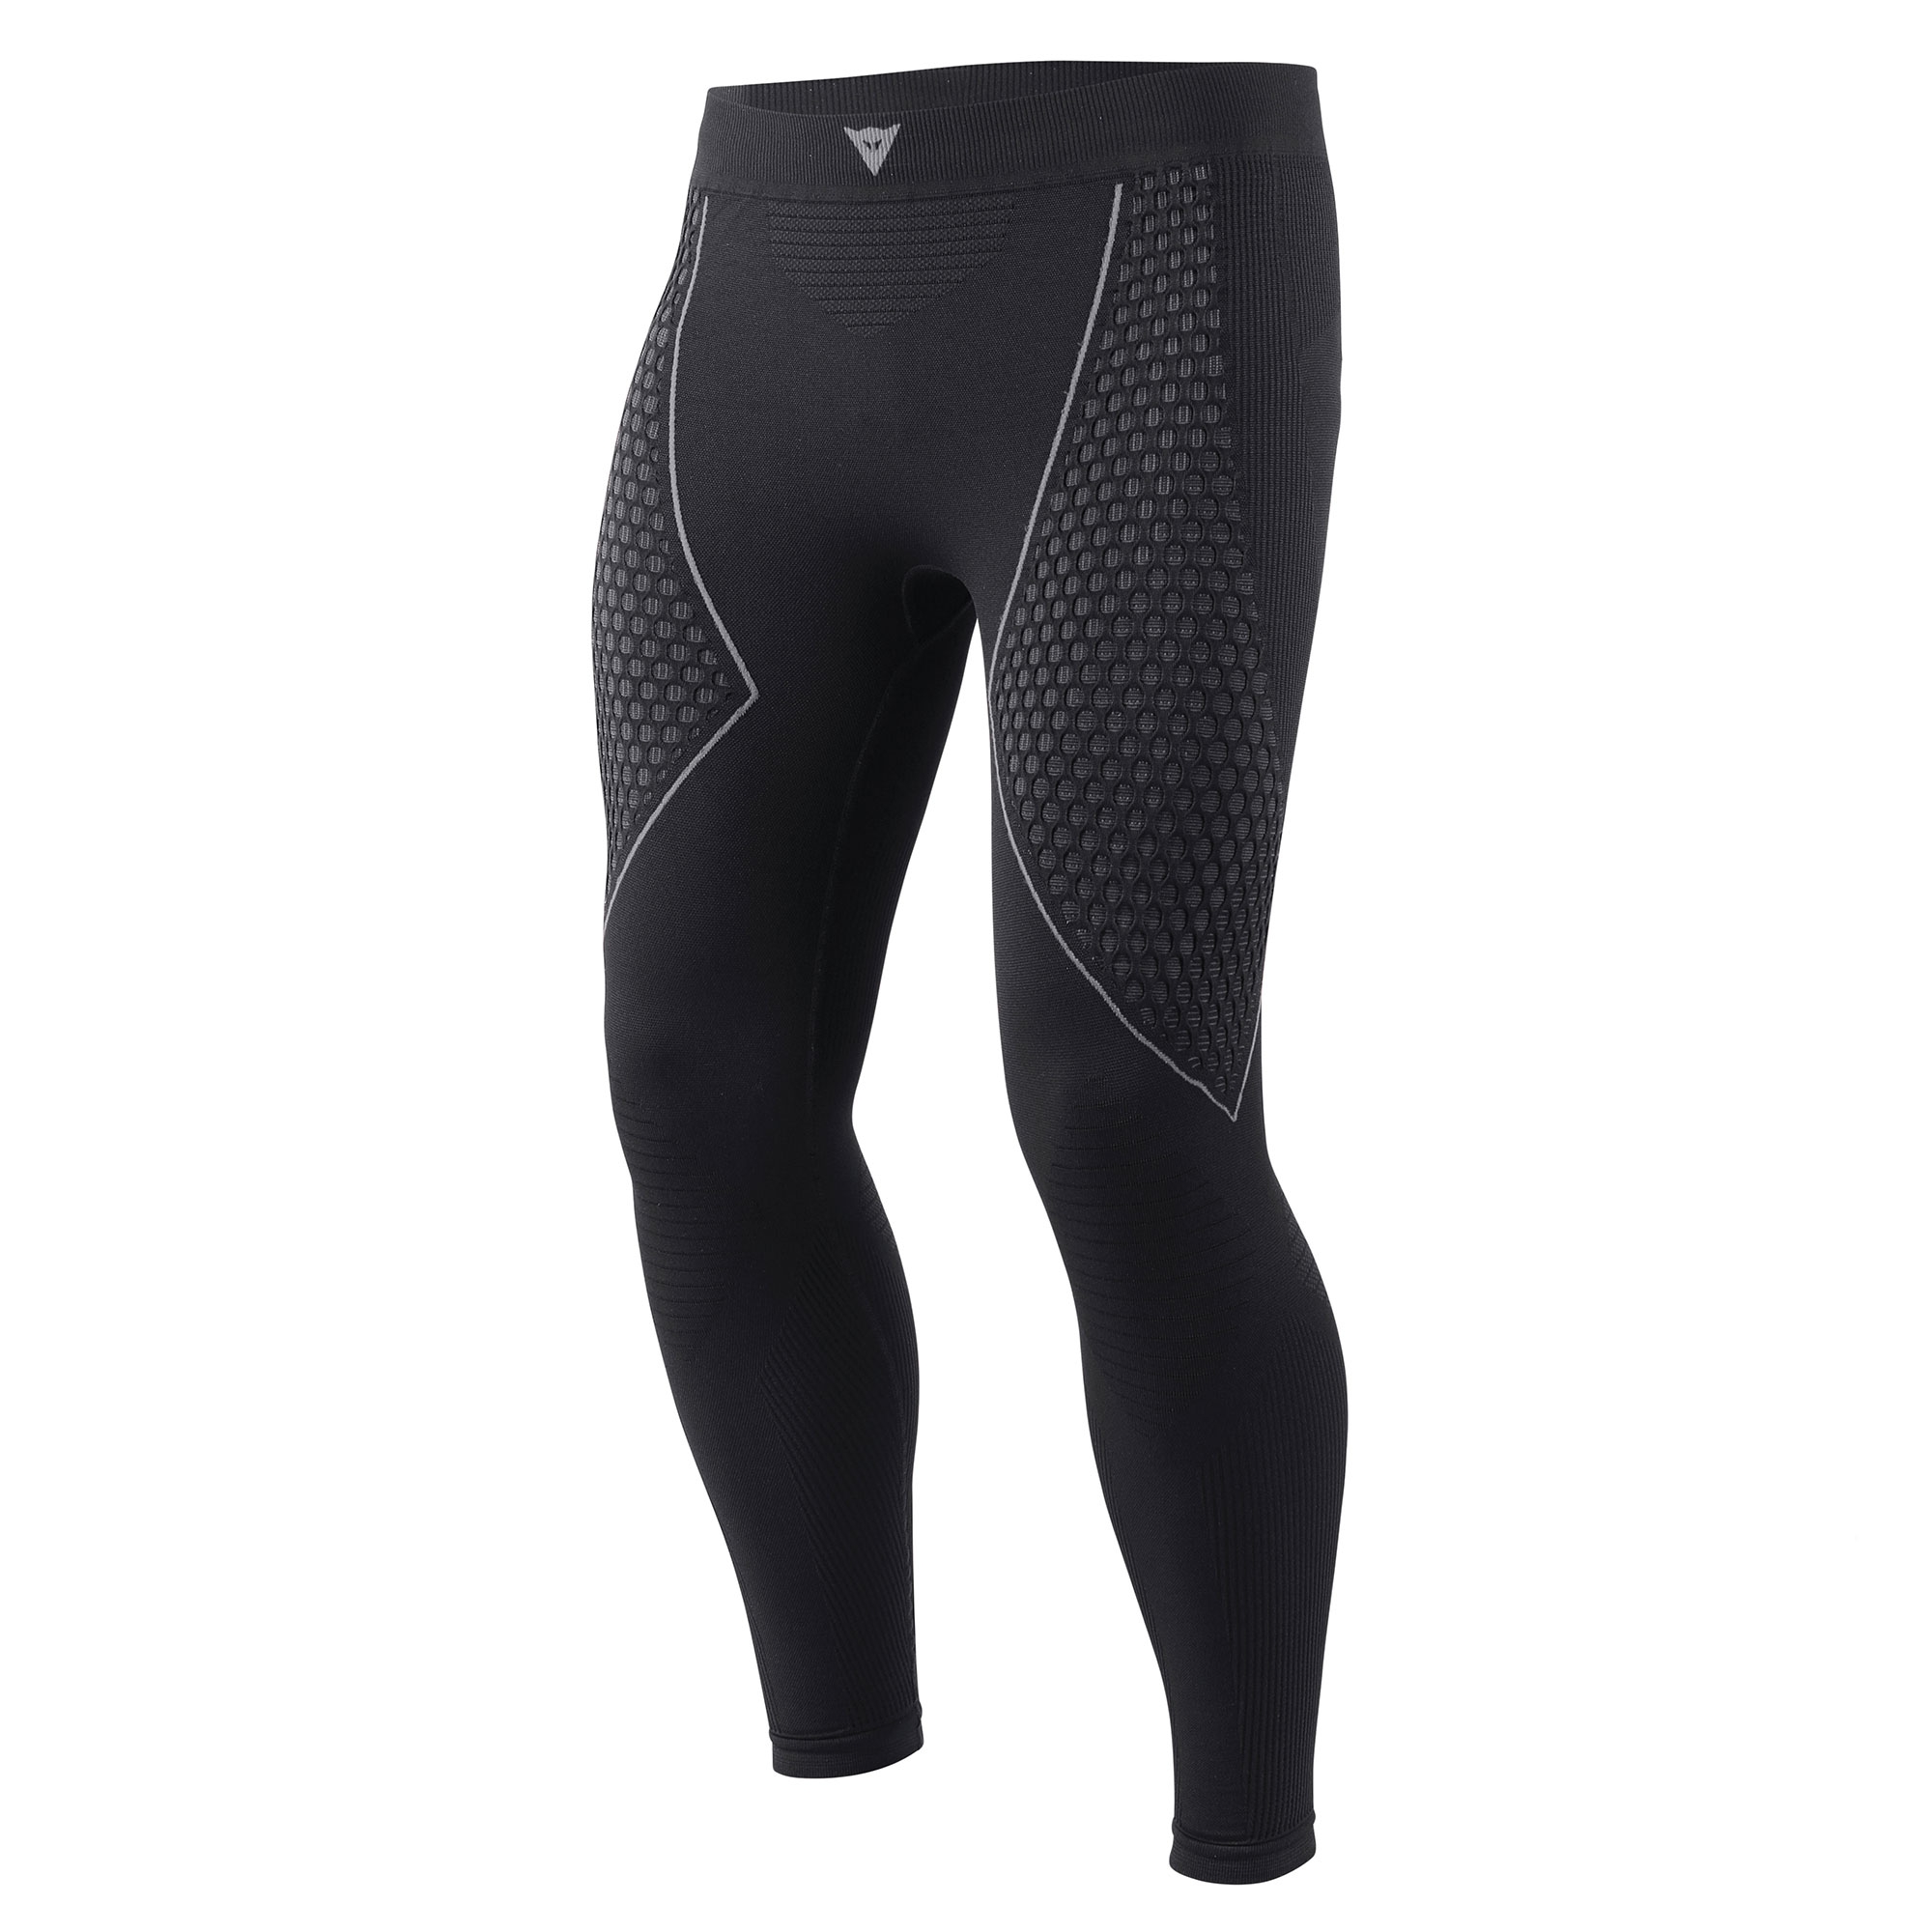 Dainese D-Core Thermo Motorbike Winter Riding Base Layer Under Pants ...